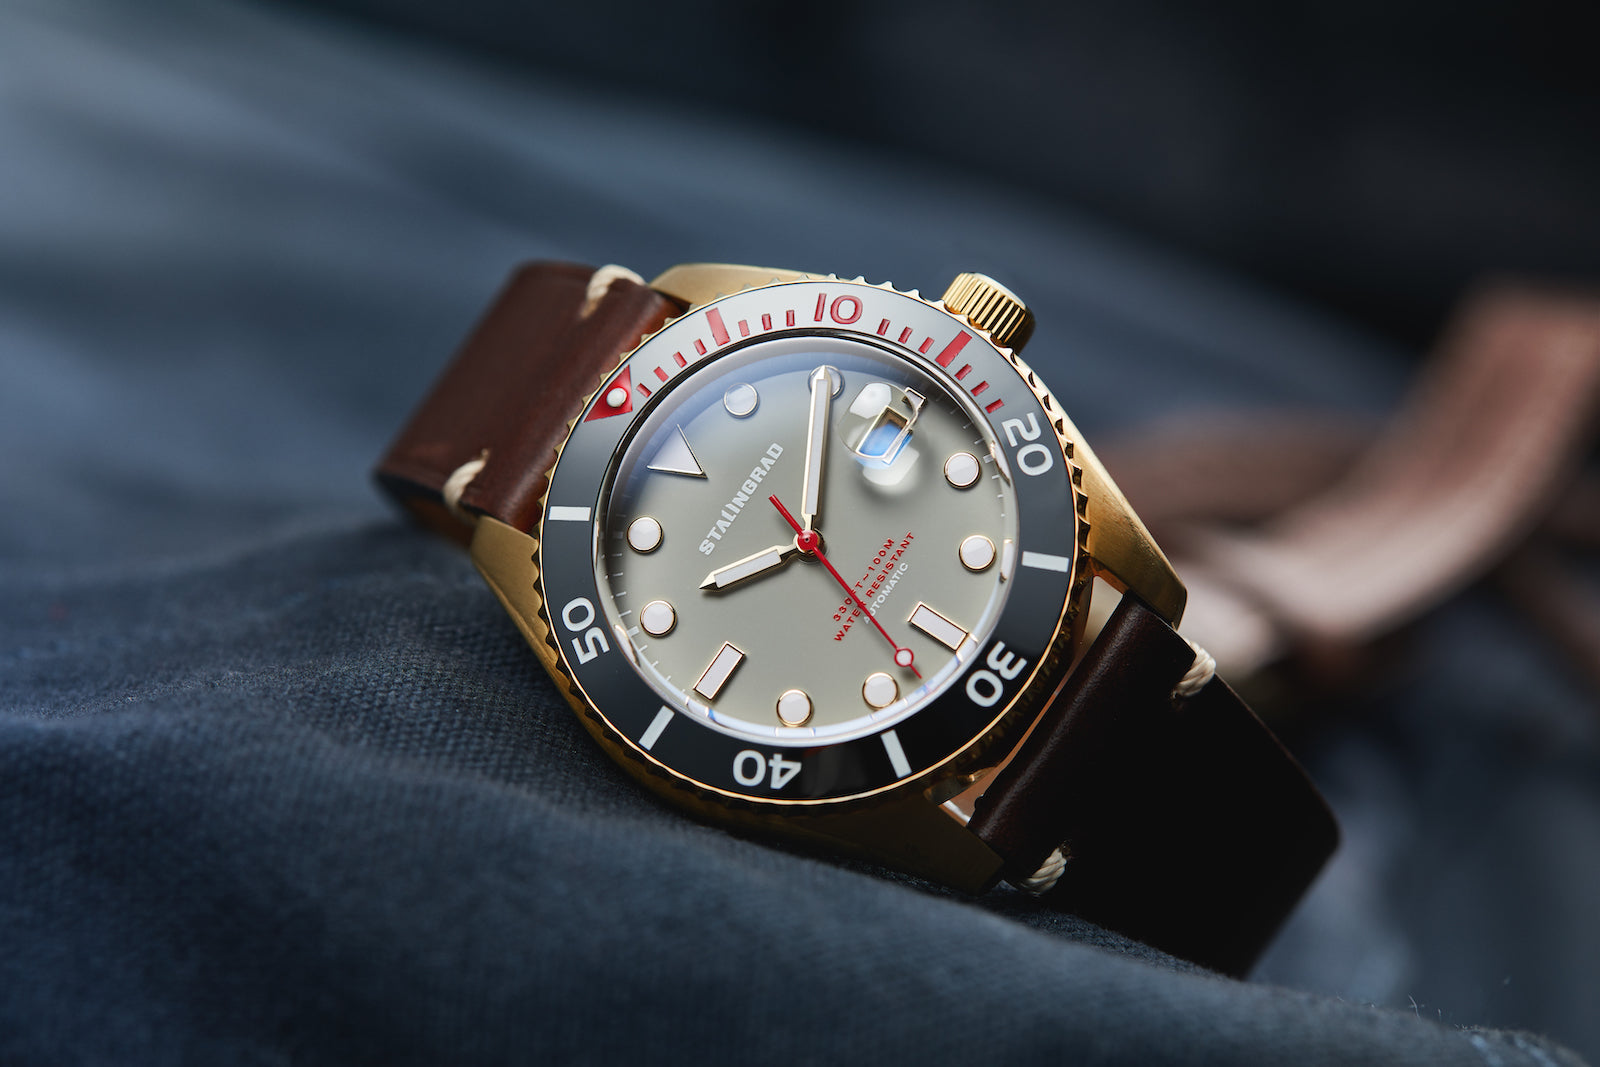 Stalingrad Volga defender automatic watch with a gold case and grey colour dial with red second hand in a brown leather strap, front view or watch on a dark background